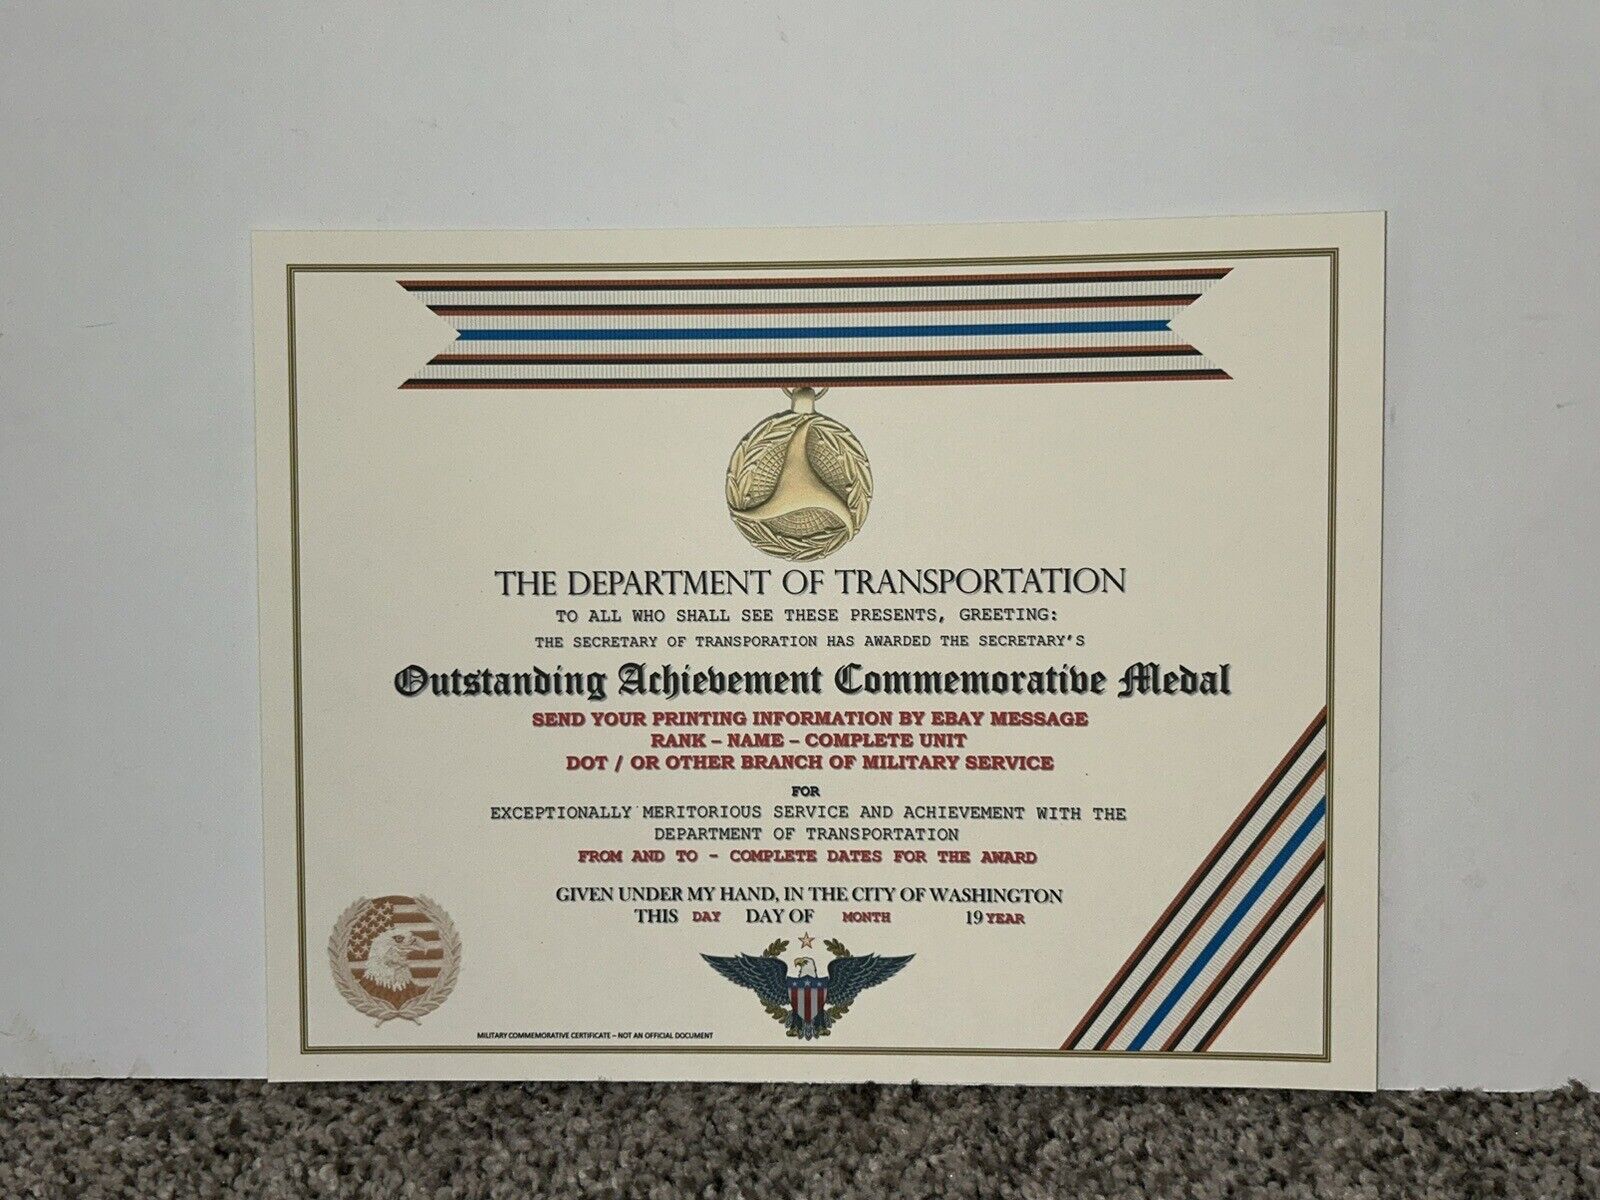 D.O.T. OUTSTANDING ACHIEVEMENT COMMEMORATIVE MEDAL CERTIFICATE ~ W/PRINTING T-1